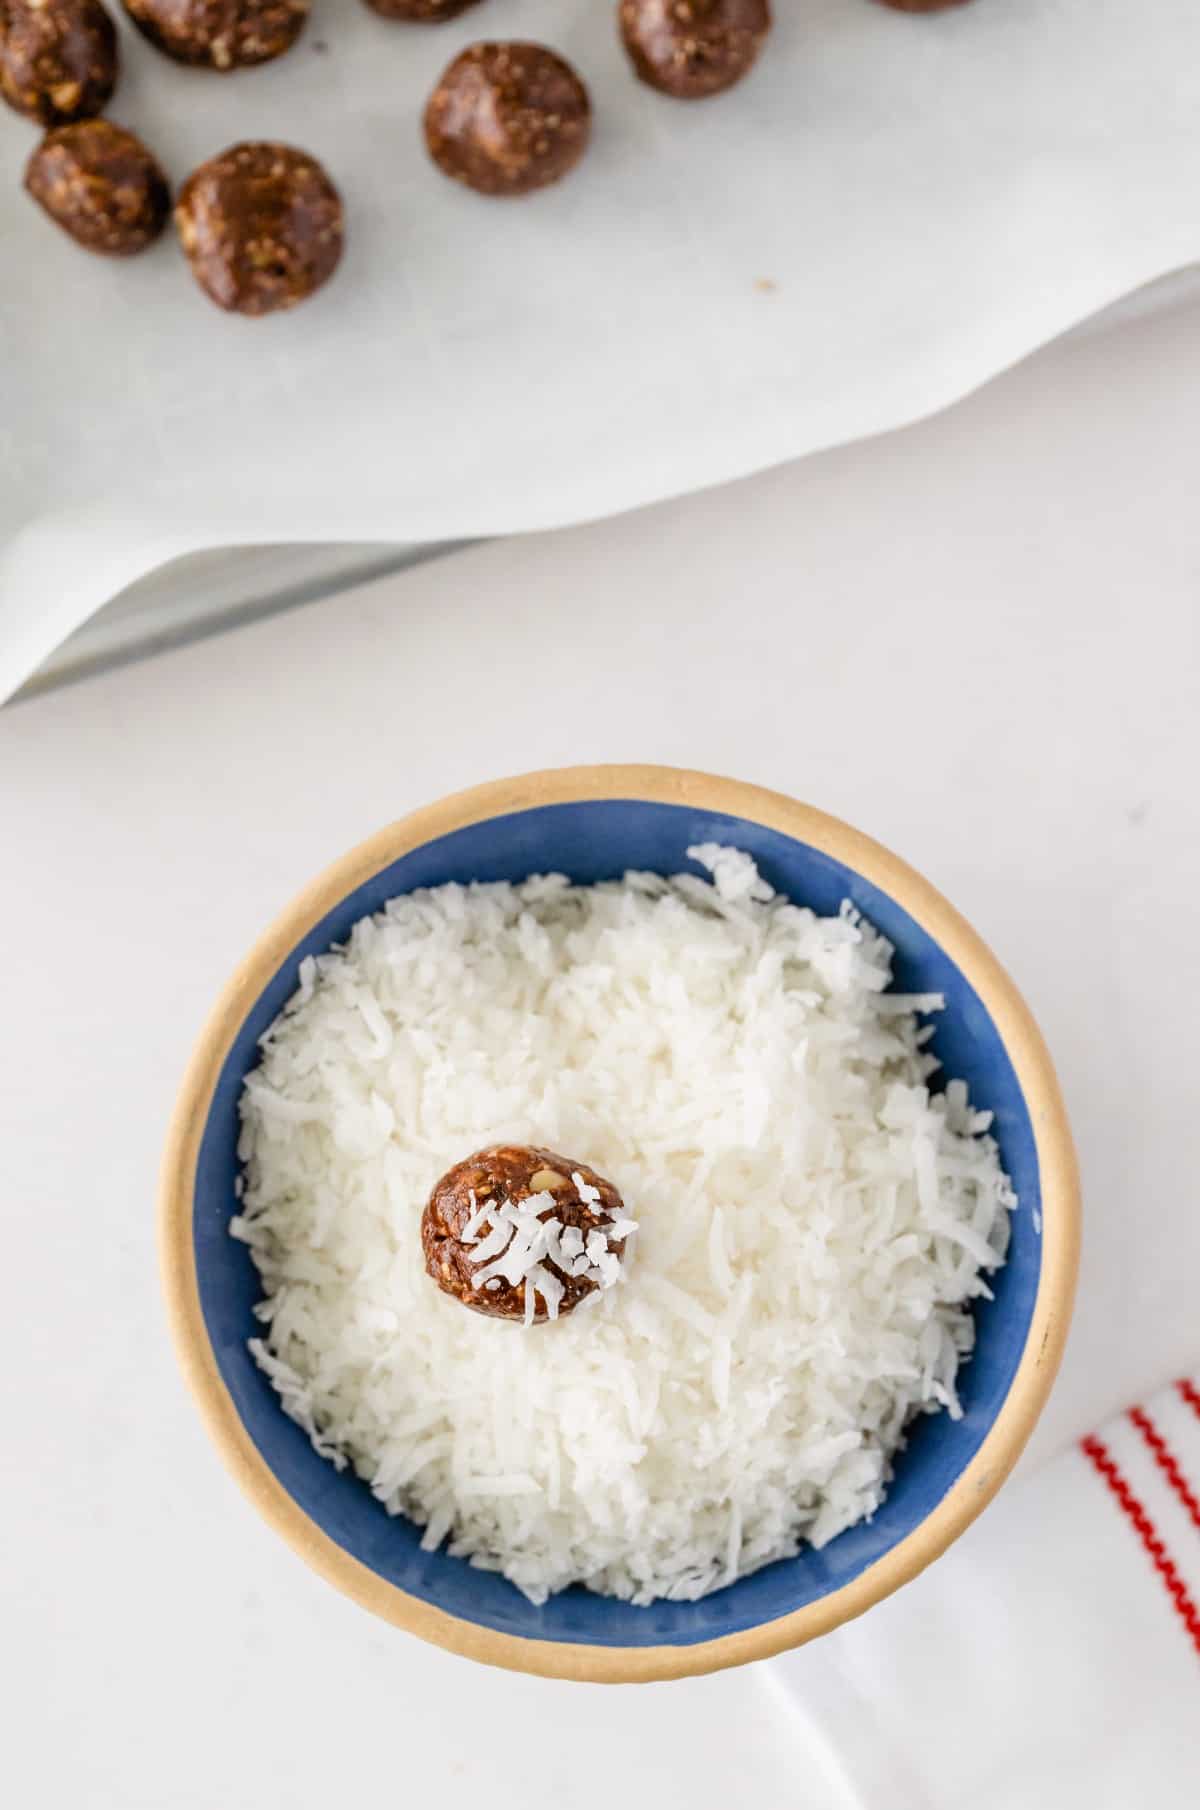 Looking down in a blue bowl full of shredded coconut and one ball is being rolled in the coating.